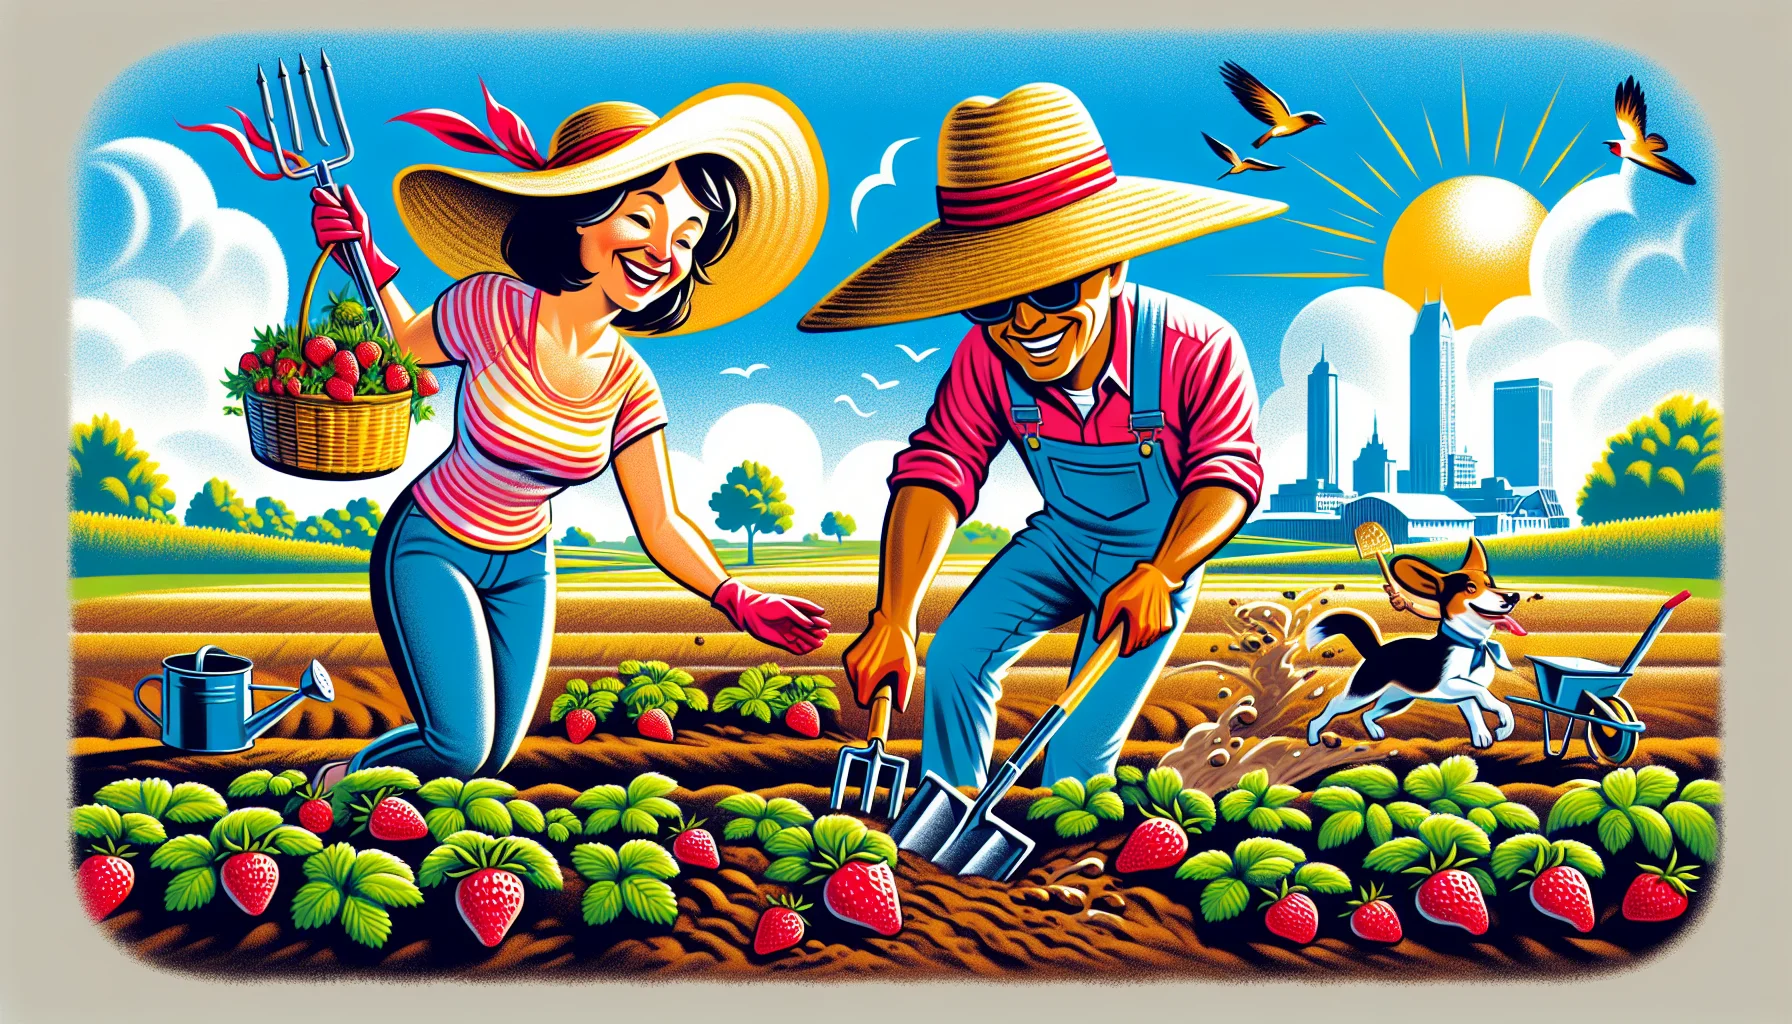 Create a vivid and amusing image depicting a gardening scene in Ohio. Imagine a tall Caucasian woman and a shorter Hispanic man, both wearing vibrant gardening clothes and big sun hats. They are joyously engaged in a friendly gardening 'race', planting bright red strawberries in brown, fertile soil. The sun is shining, birds are chirping, with a backdrop of a typical Ohio landscape. Gardening tools are scattered around, and a playful dog is running in the foreground. This scene should inspire fun and enjoyment, showing gardening as a lively, entertaining occupation rather than a chore.